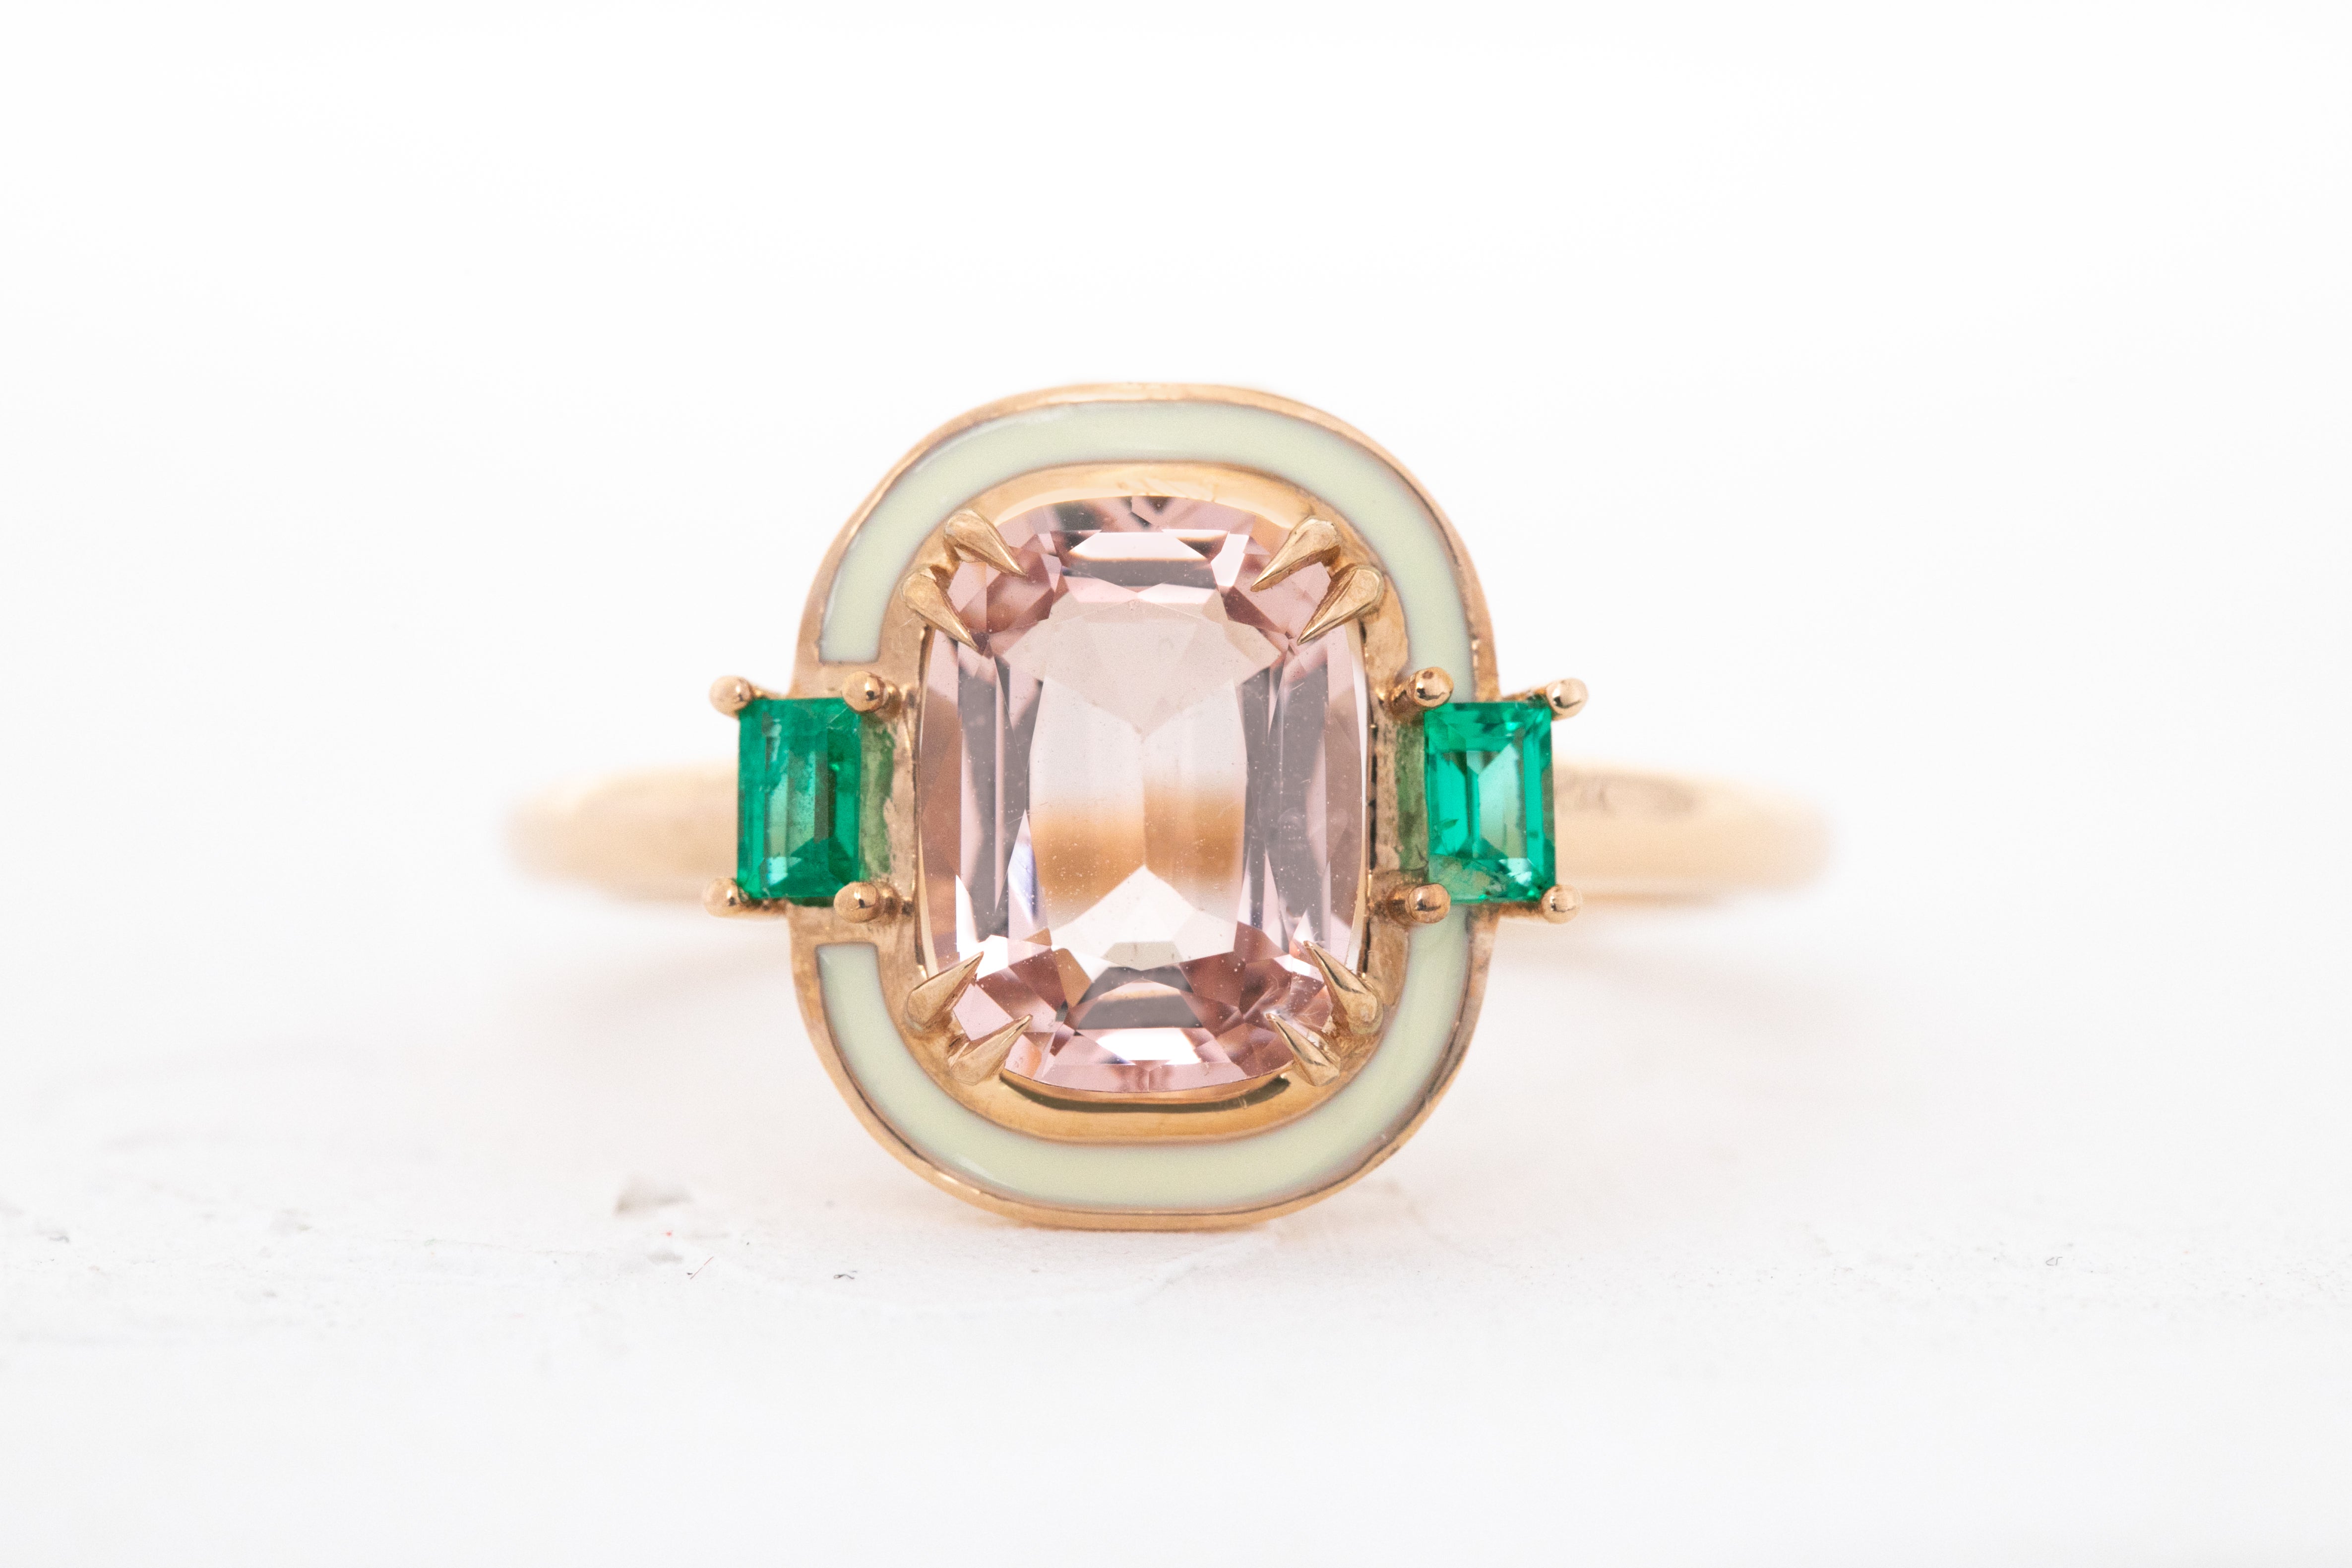 For Sale:  Artdeco Style, Enameled 14k Gold Morganite and Emerald Cocktail Ring 2